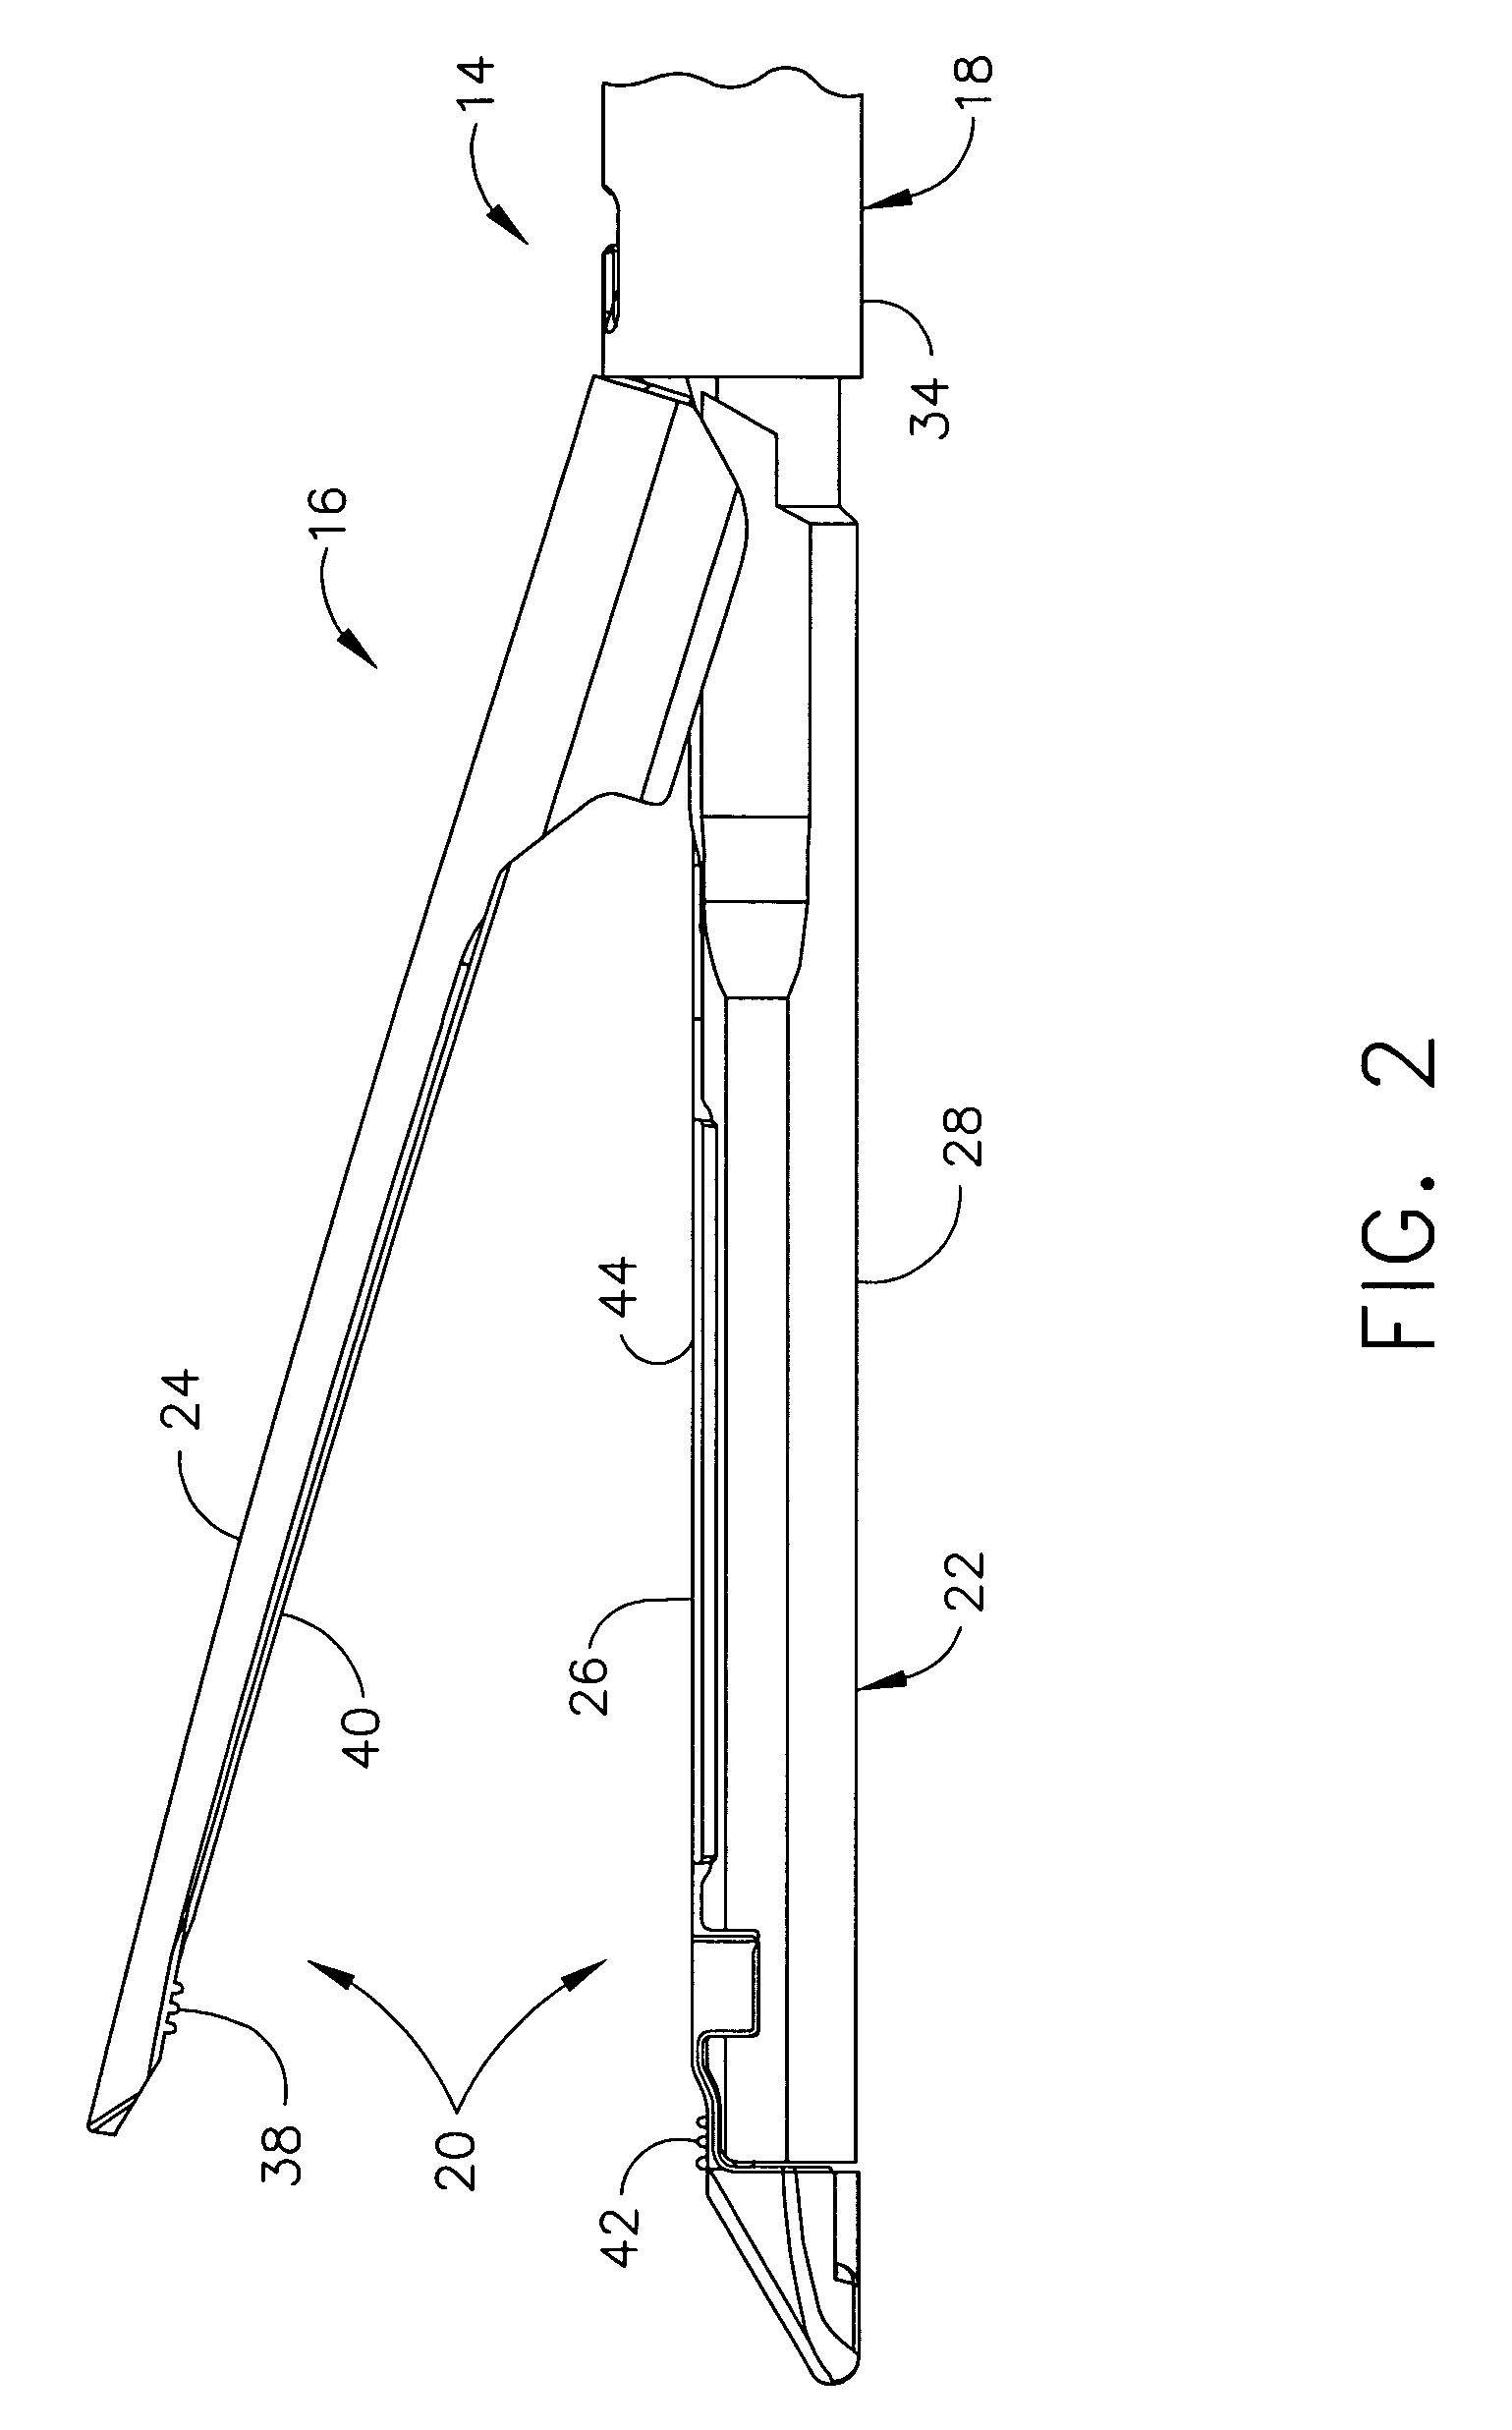 Surgical stapling instrument having end effector gripping surfaces